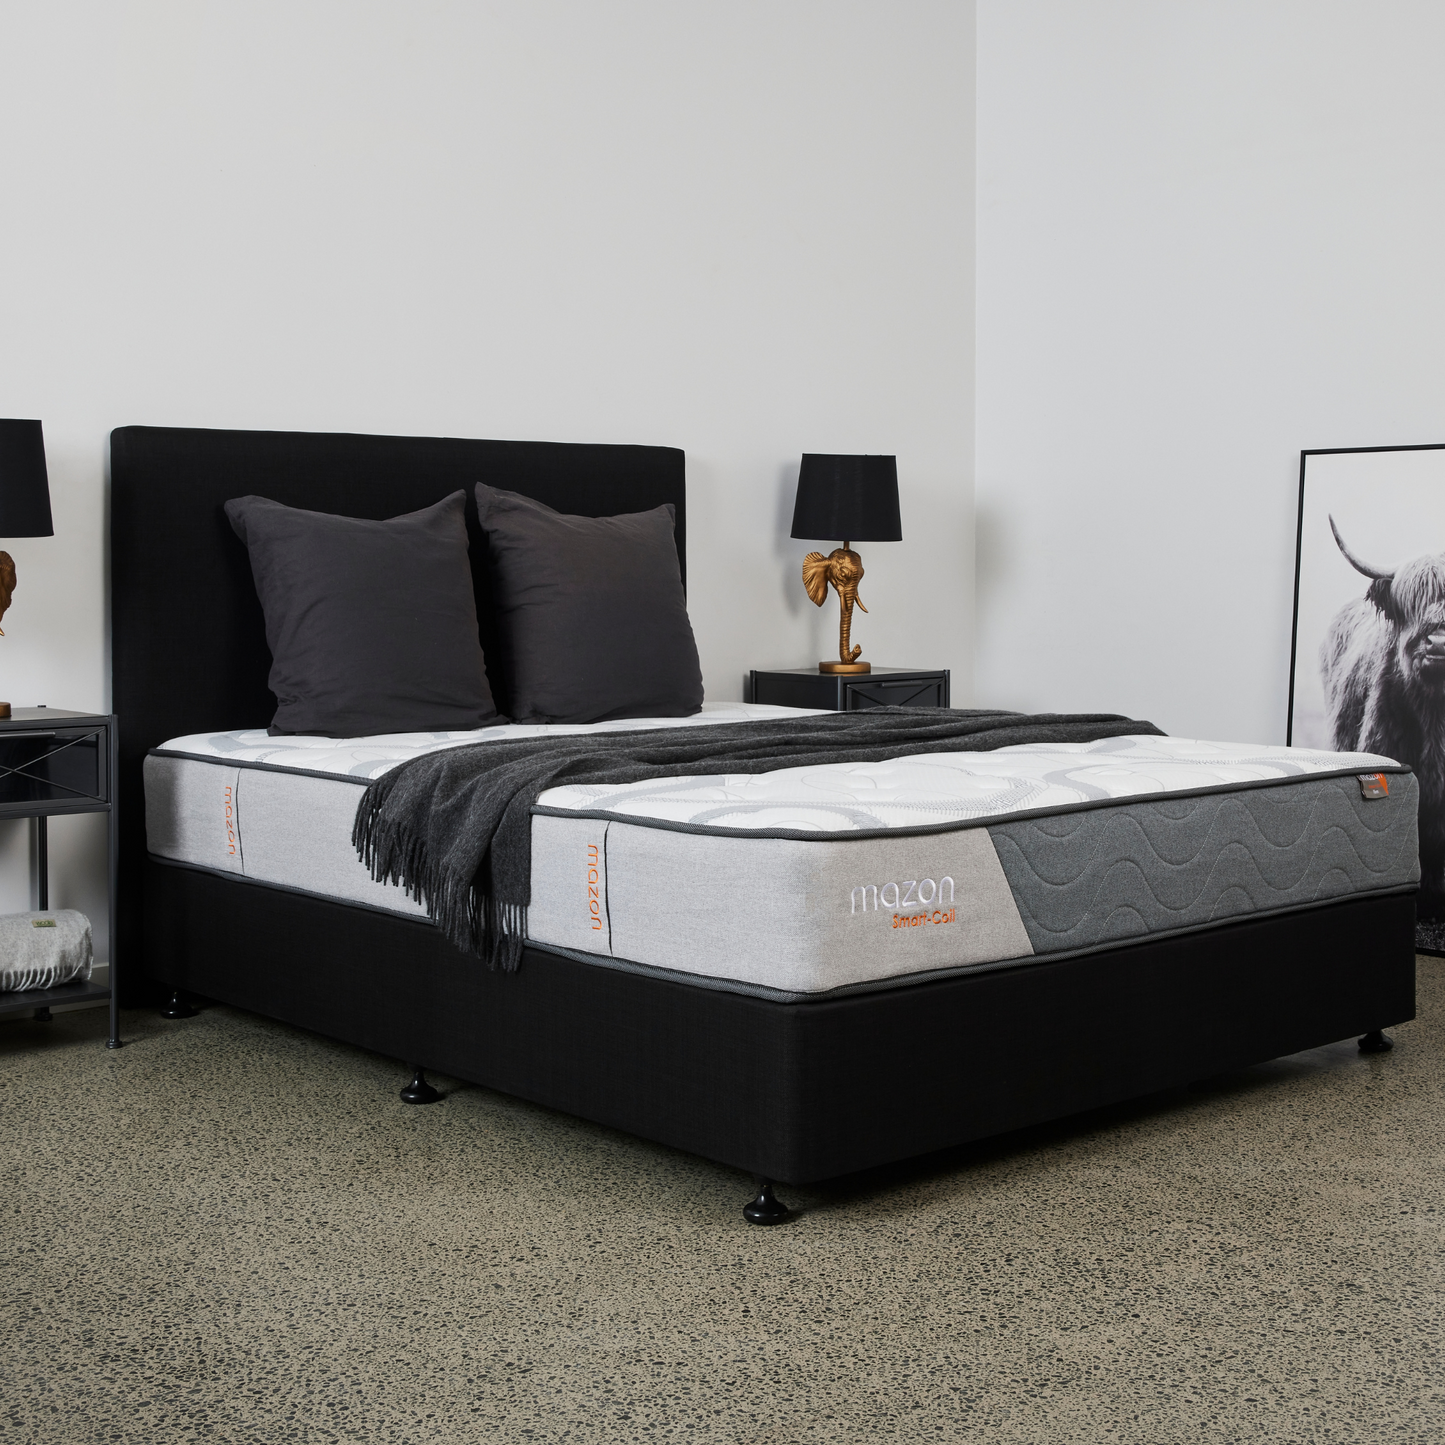 Mazon Smart-Coil Firm Bed